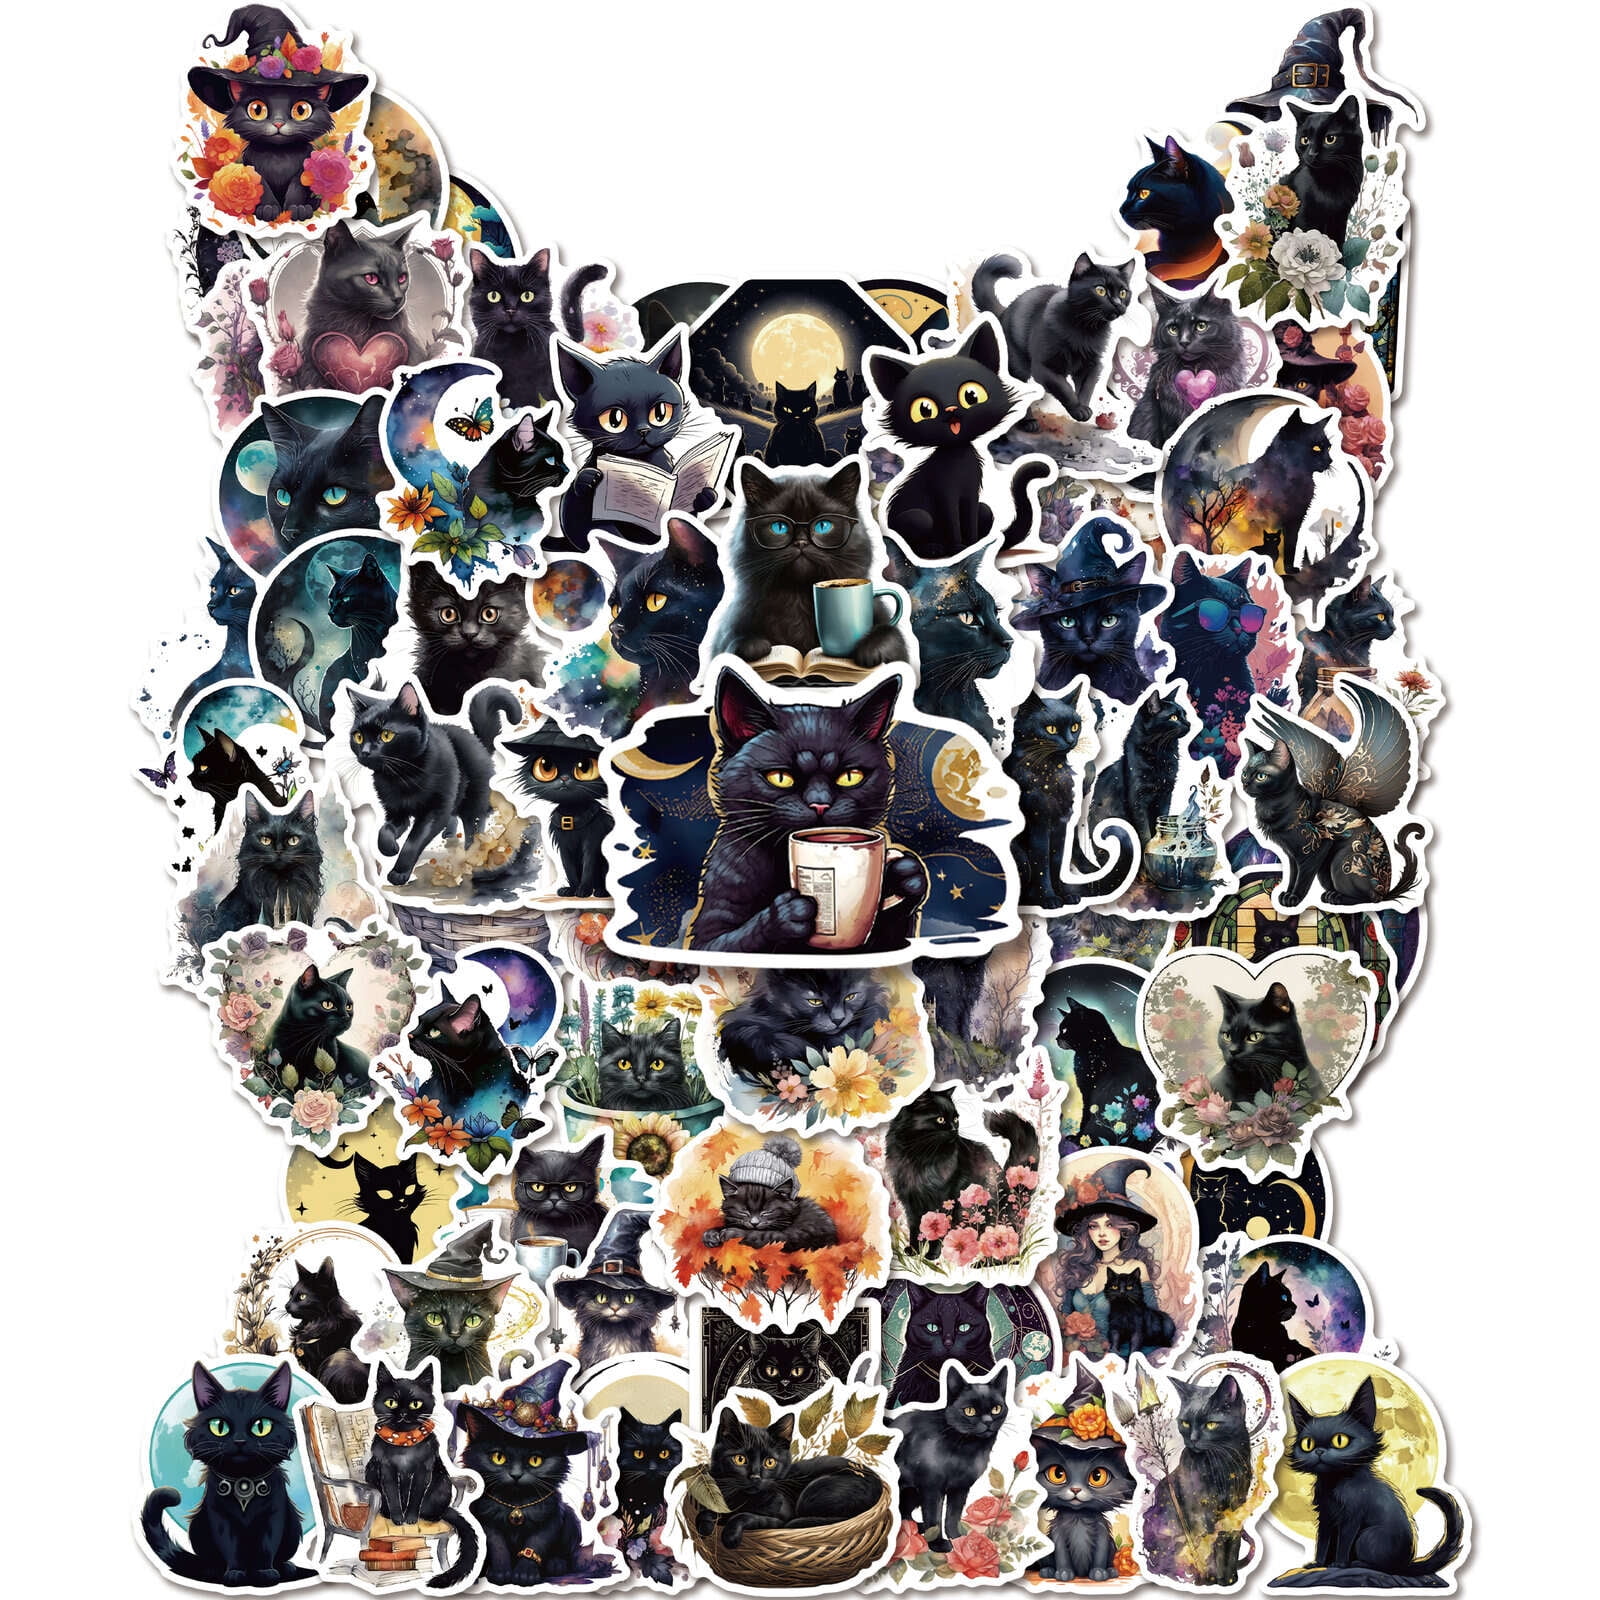 MiStar 100 PCS Black Cat Stickers, 3.15 Cat Stickers Pack, Aesthetic Vinyl  Waterproof Stickers for Water Bottles Laptop Phone Case Luggage Car, Black